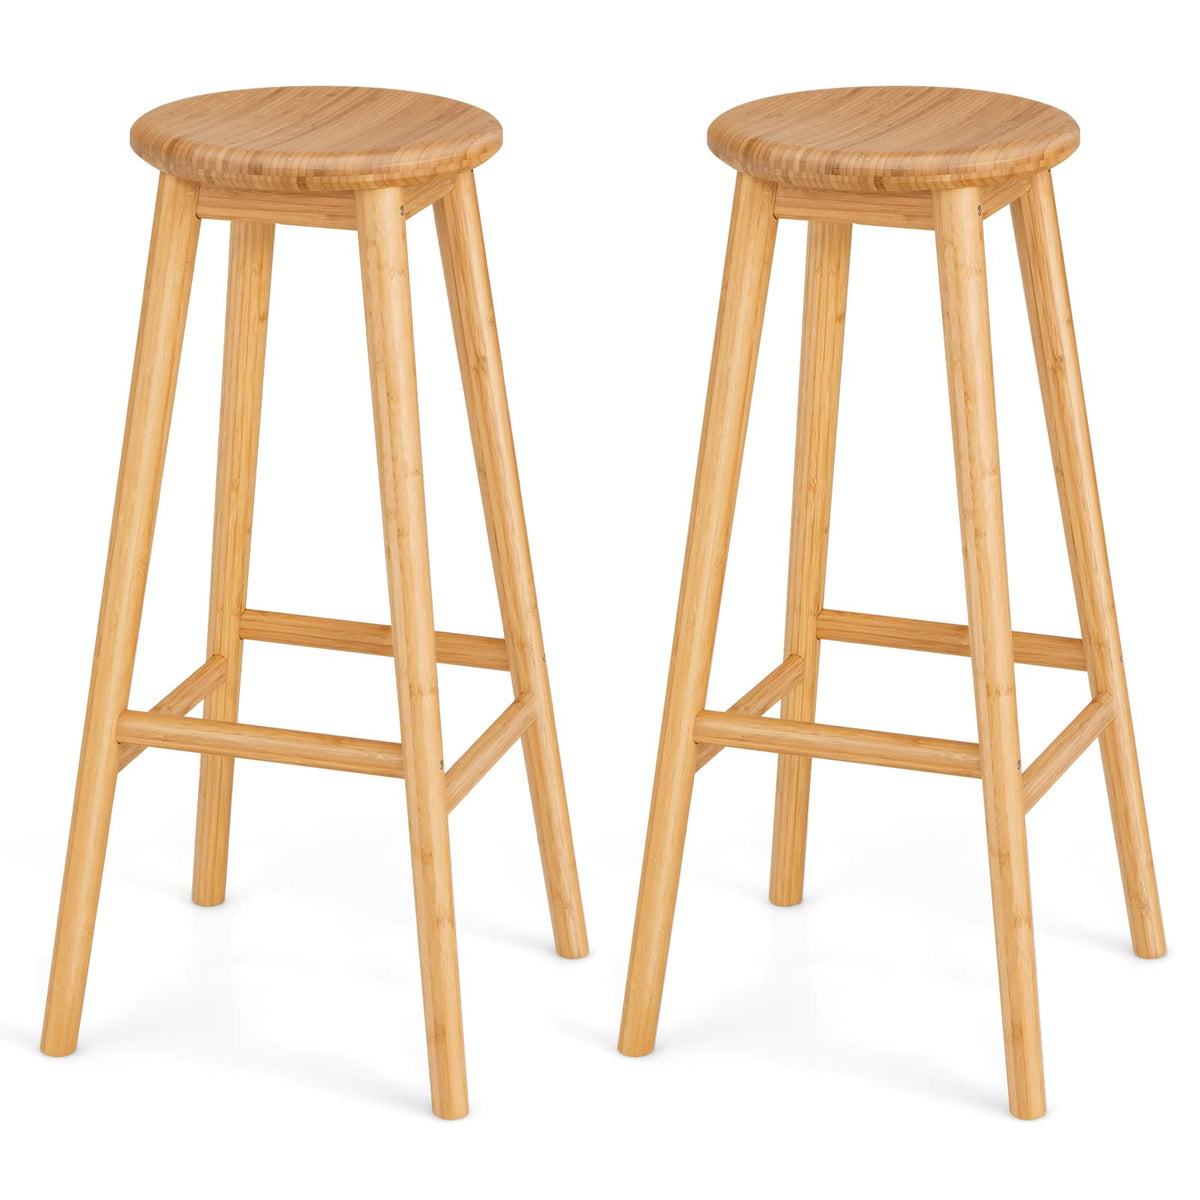 Giantex Bamboo Bar Stools Set of 2, Round Seat Breakfast Dining Chairs w/Footrest, Natural